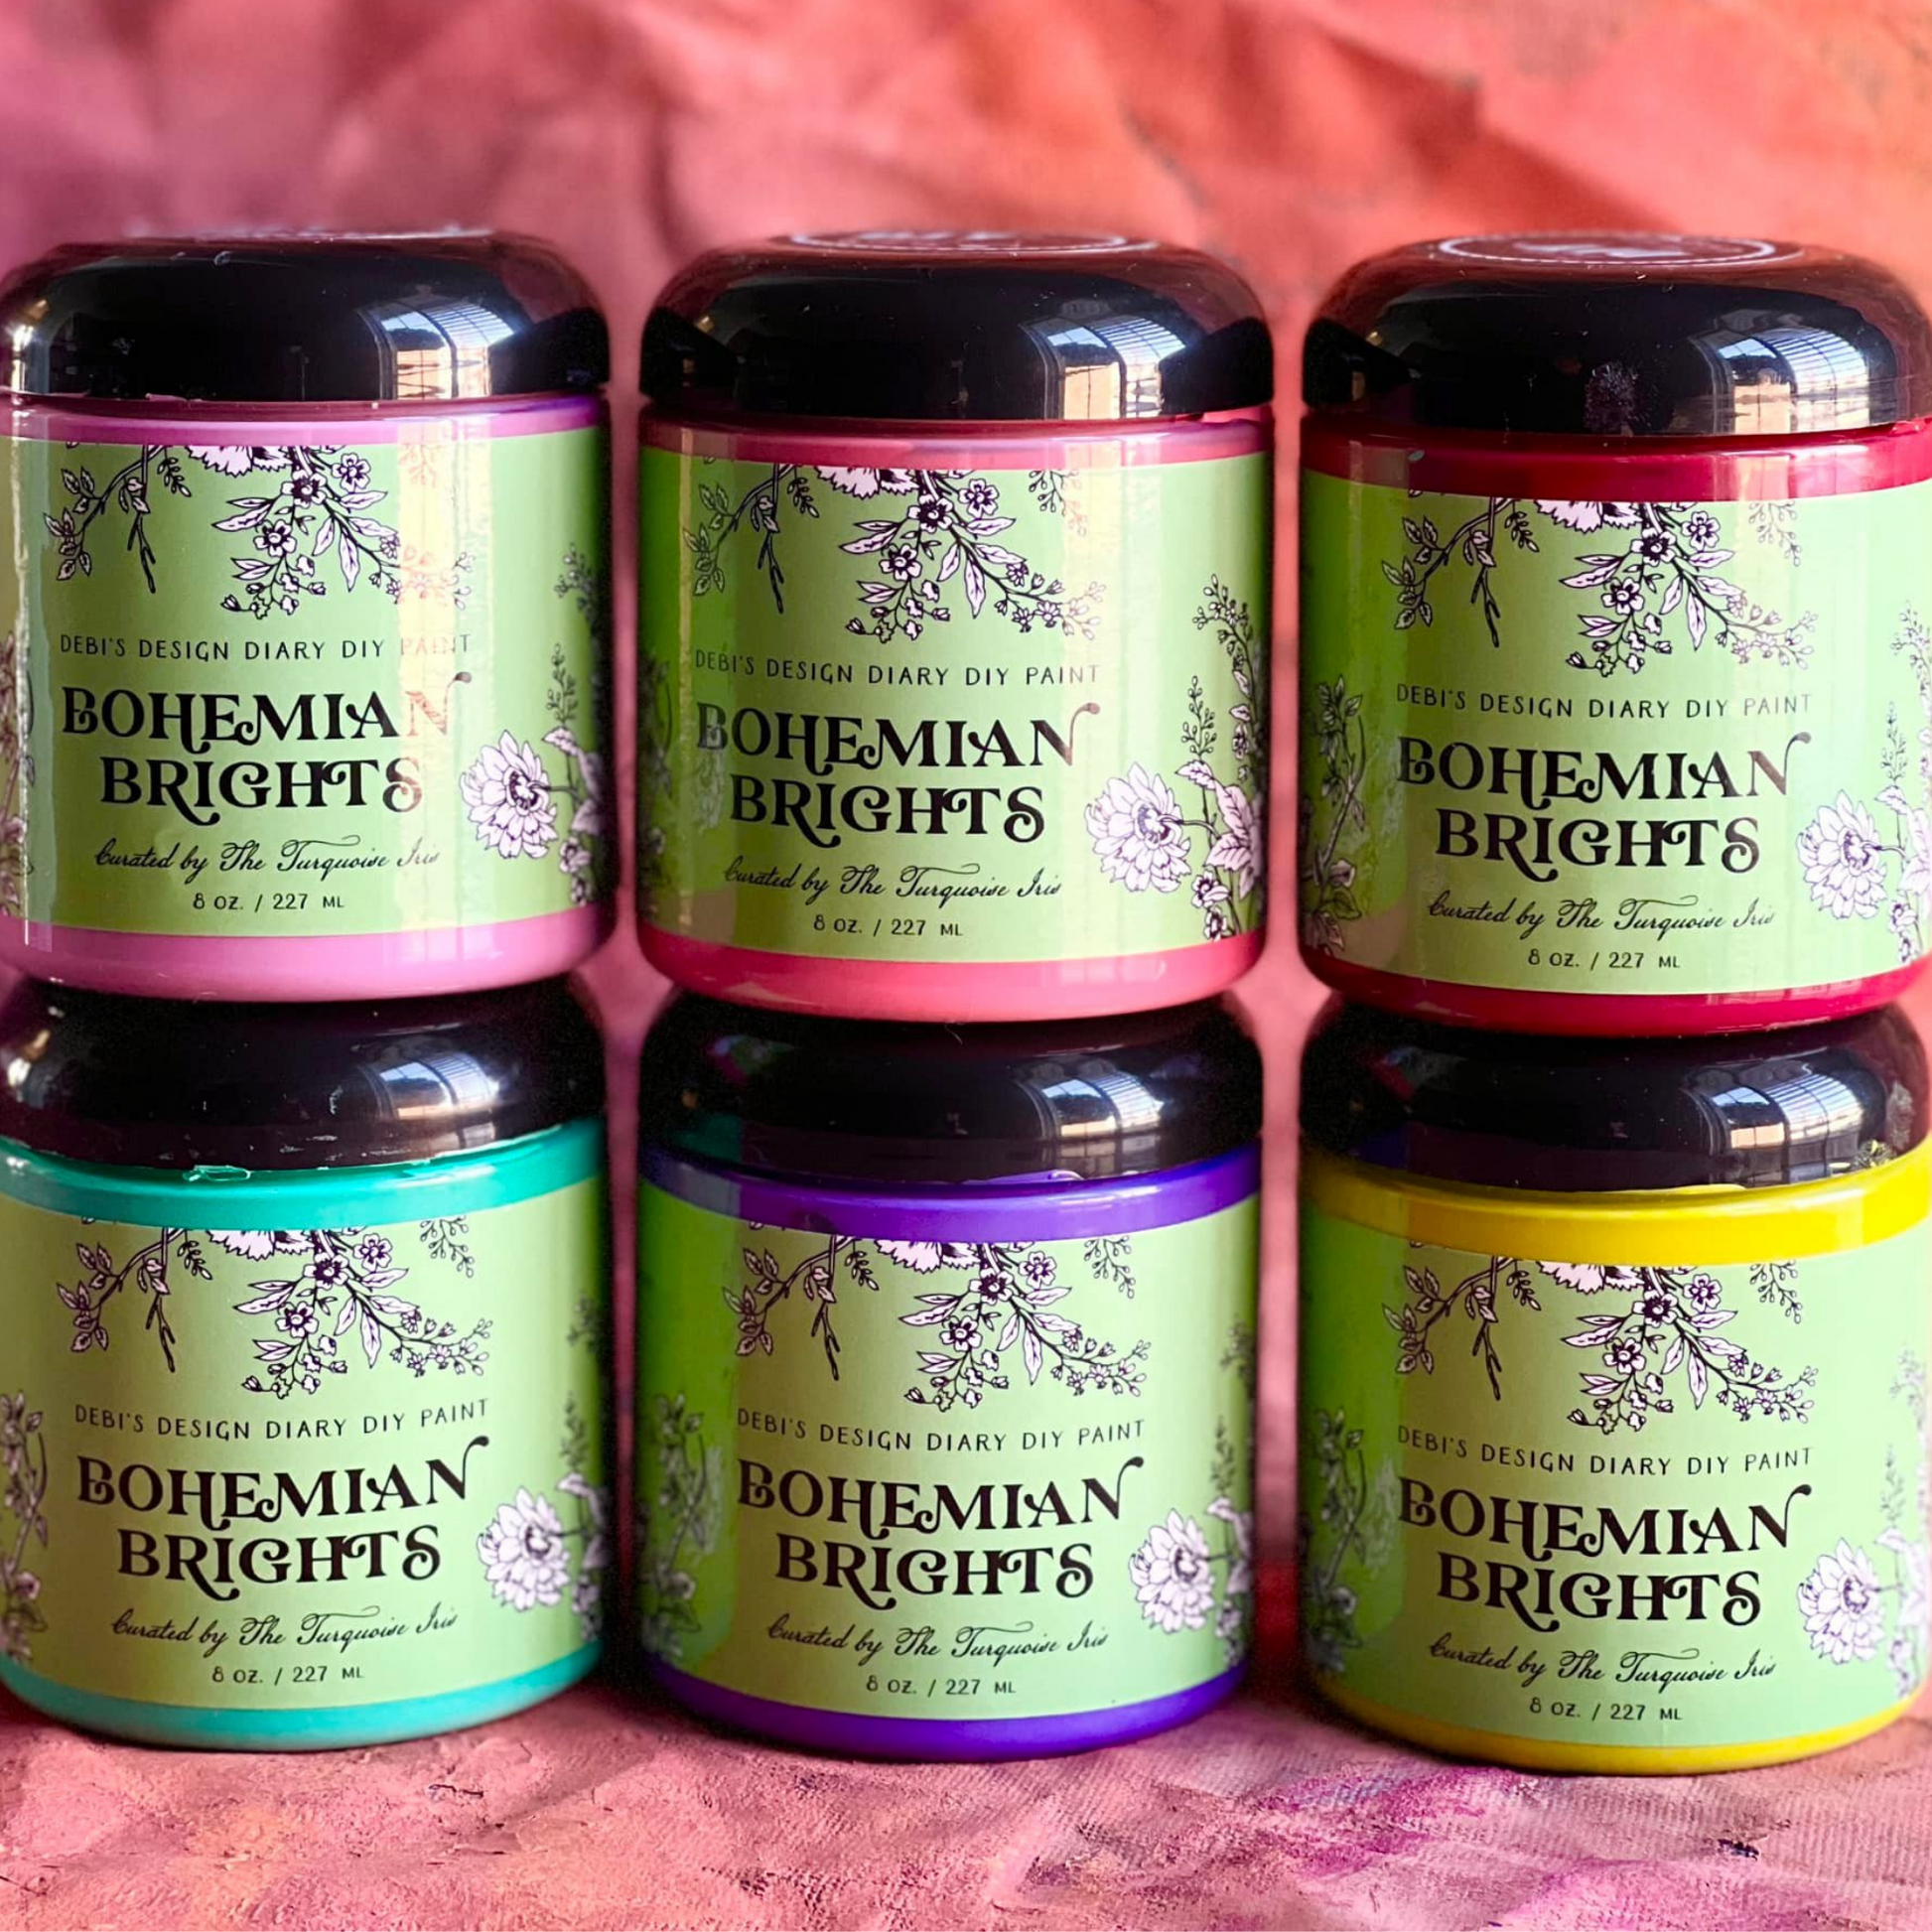 The Bohemian Brights Collection by by Debi's Design Diary DIY Paint. 4 oz. jar available at Milton's Daughter. Curated by Dionne Woods of the Turquoise Iris.